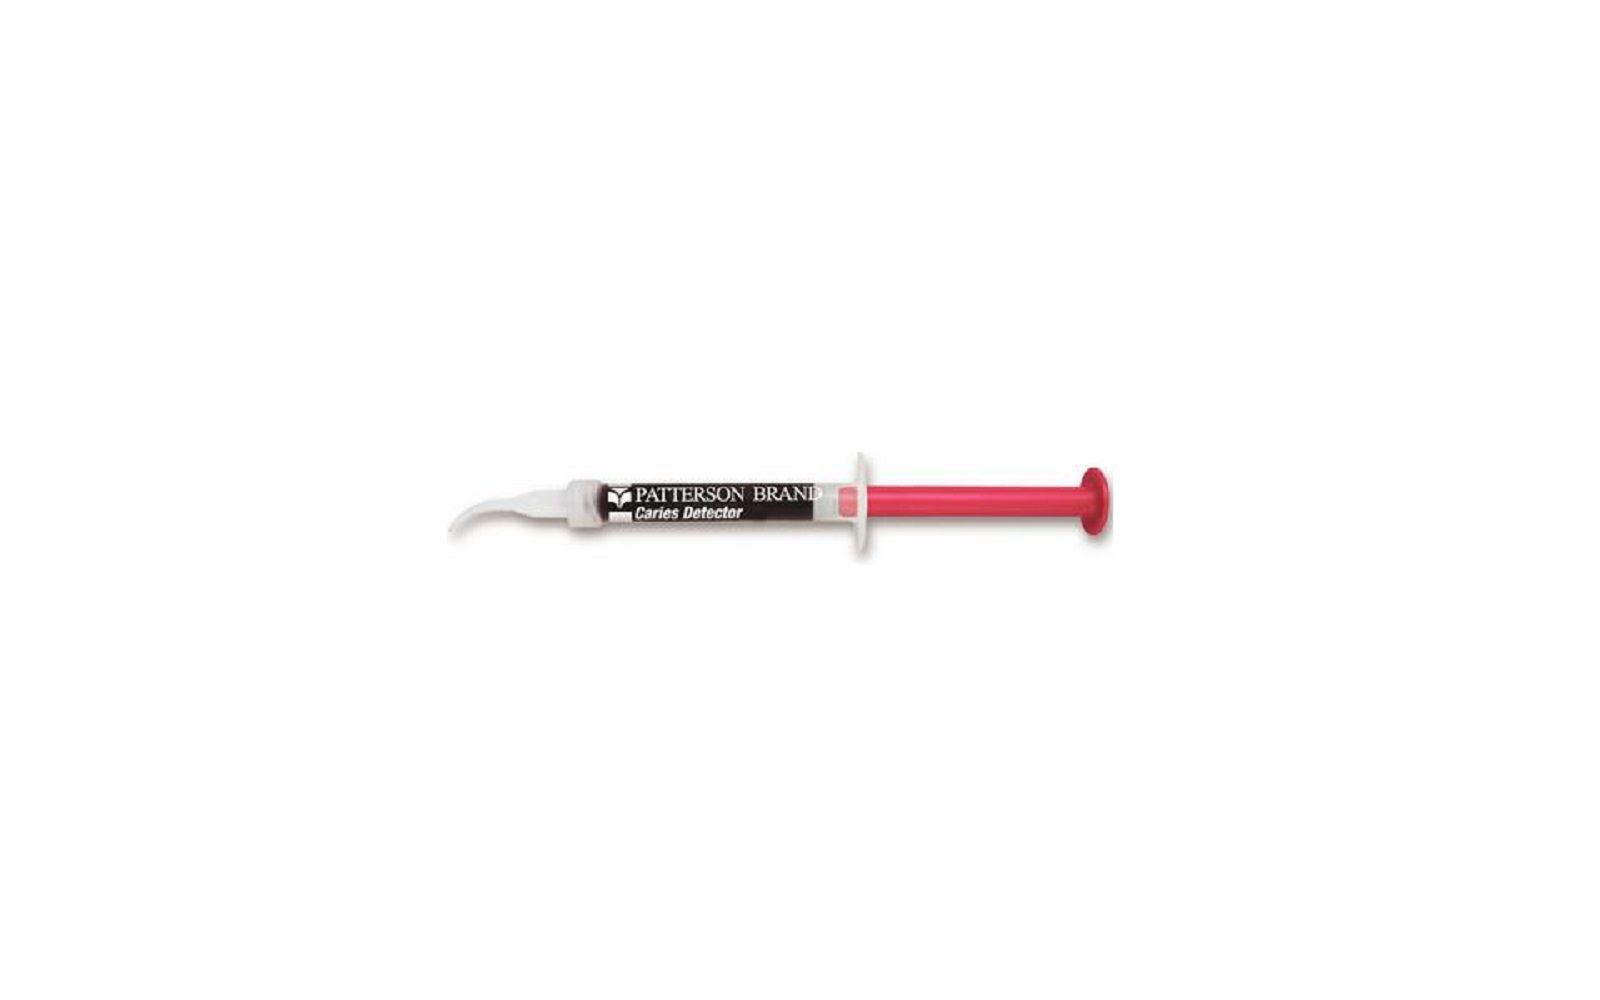 Patterson® caries detector kit